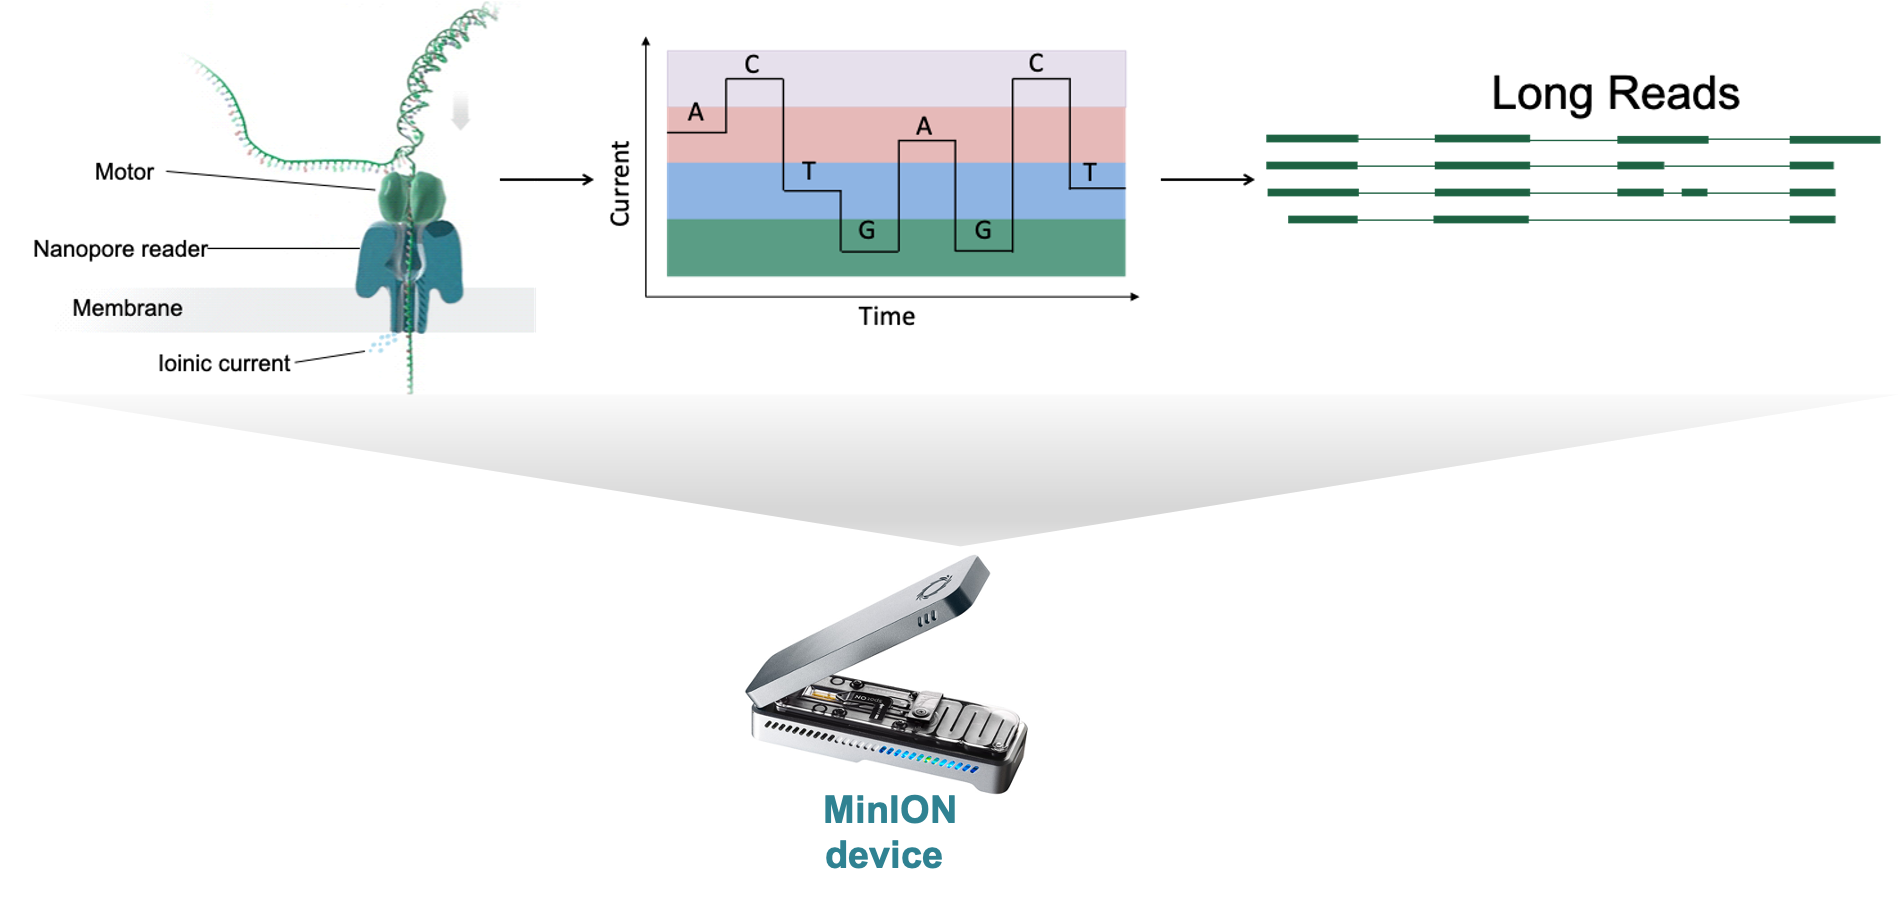 The working principle of the nanopore sequencing device